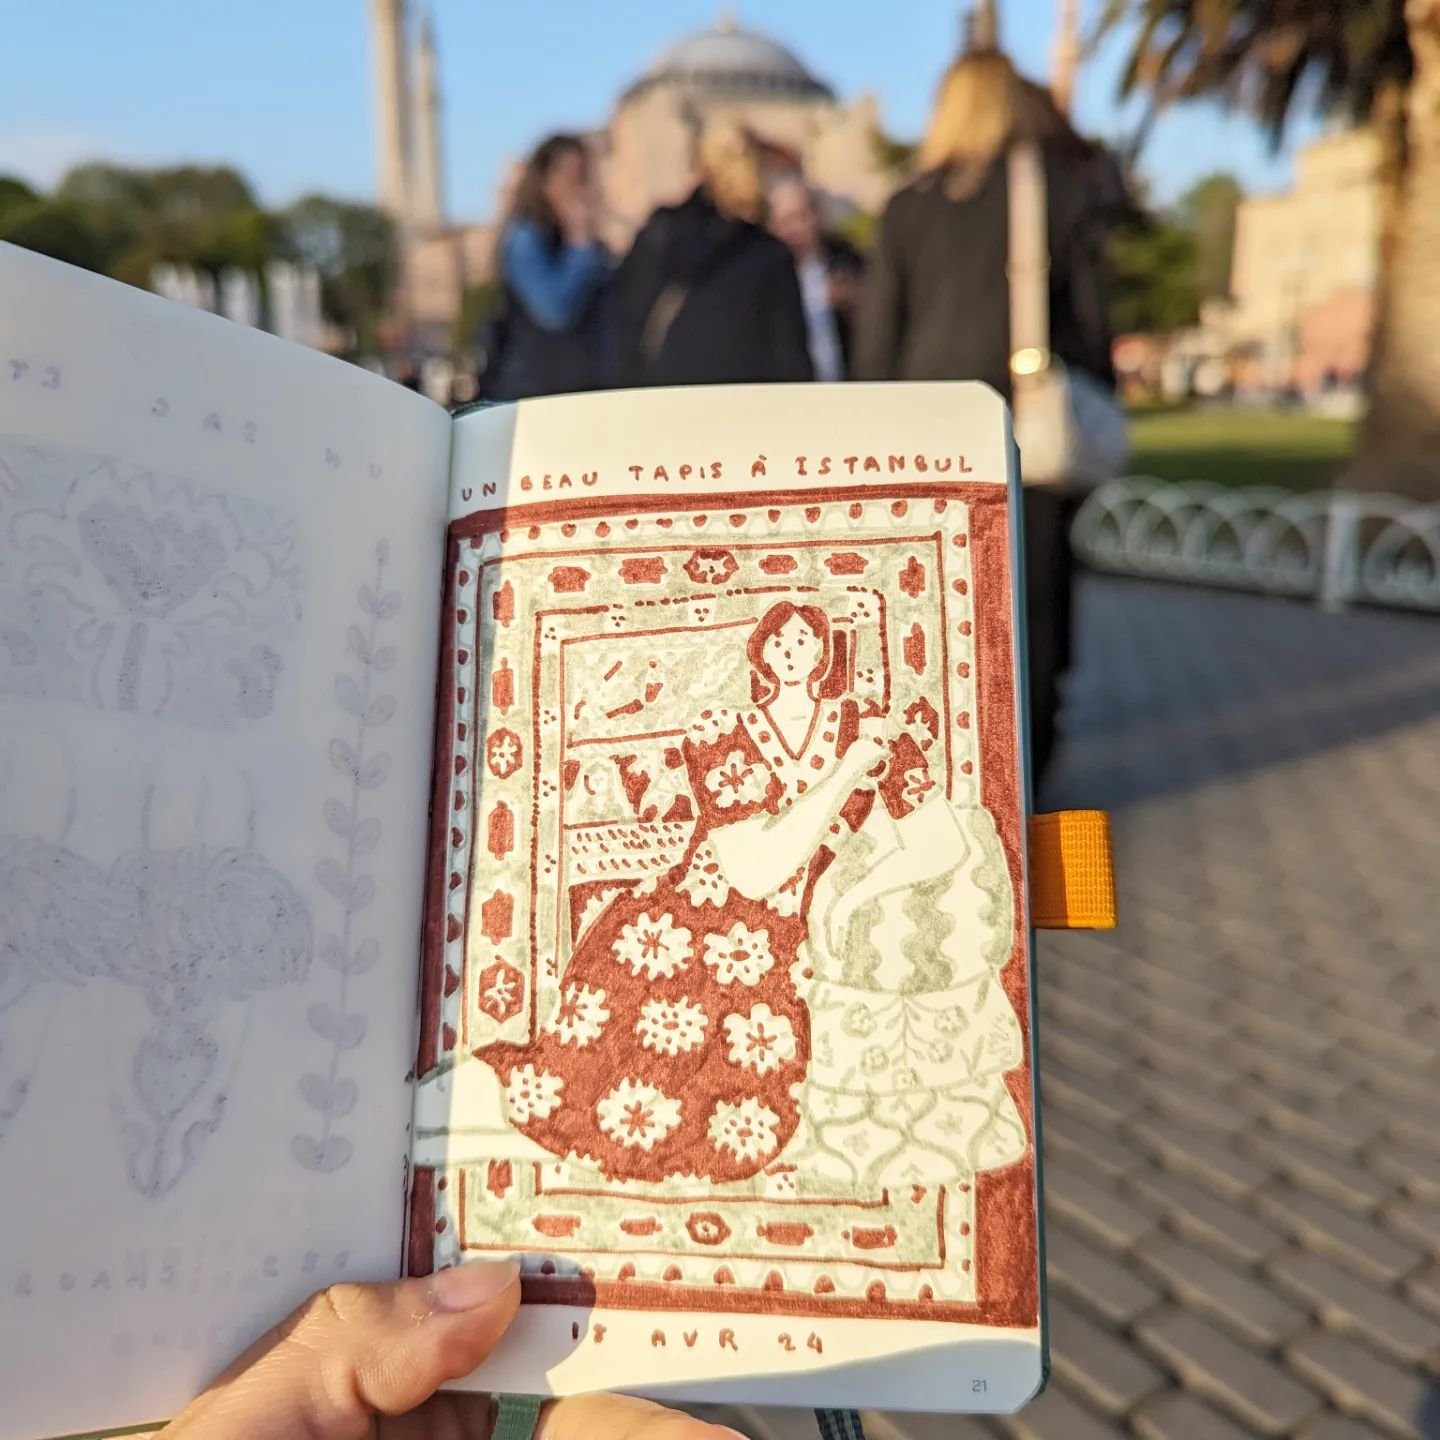 A few sketchbook pages from Istanbul. The carpets were so beautiful and inspiring! 
.
.
.
#istanbul #artistsketchbook #sketchbookspread #sketchbookpages